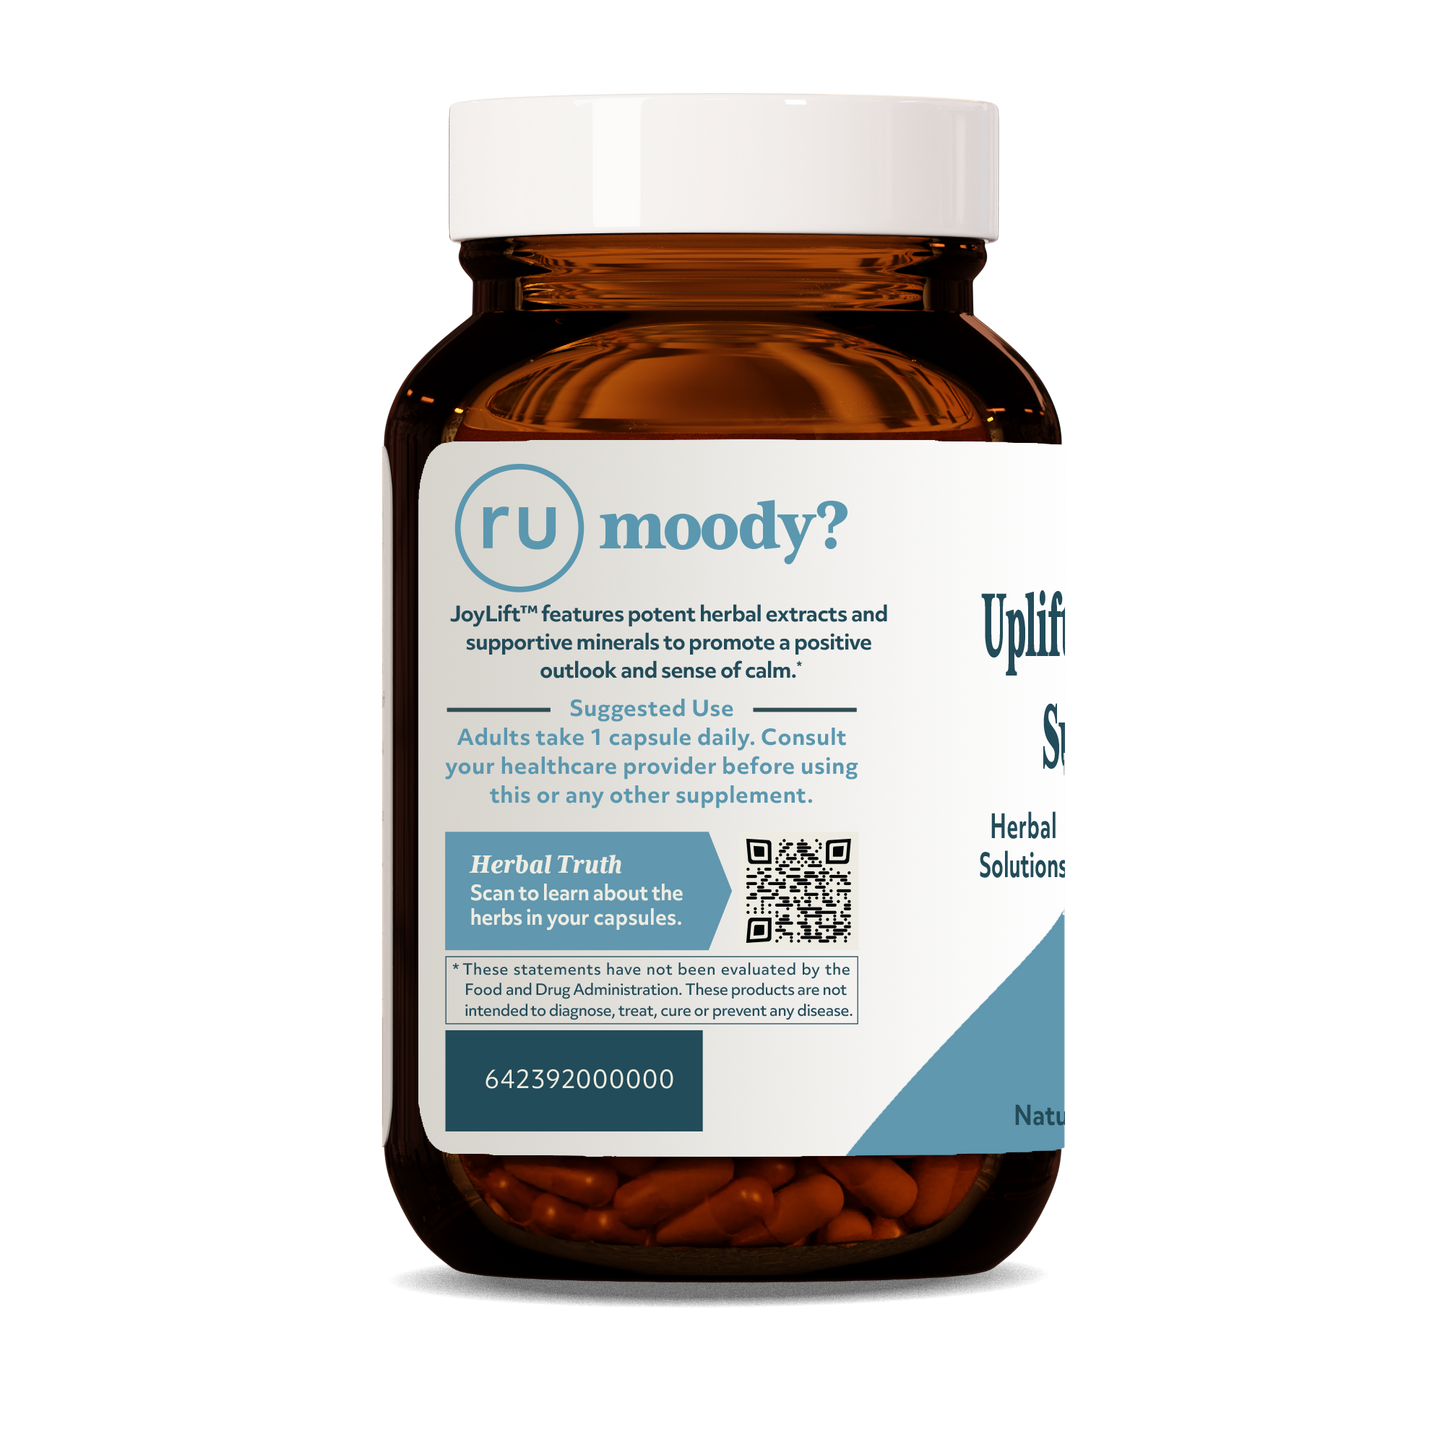 joylift Uplifting Herbal Mood Formula, Promotes Healthy Stress Response and Calm Nerves by ruved herbal supplements and ayush herbs